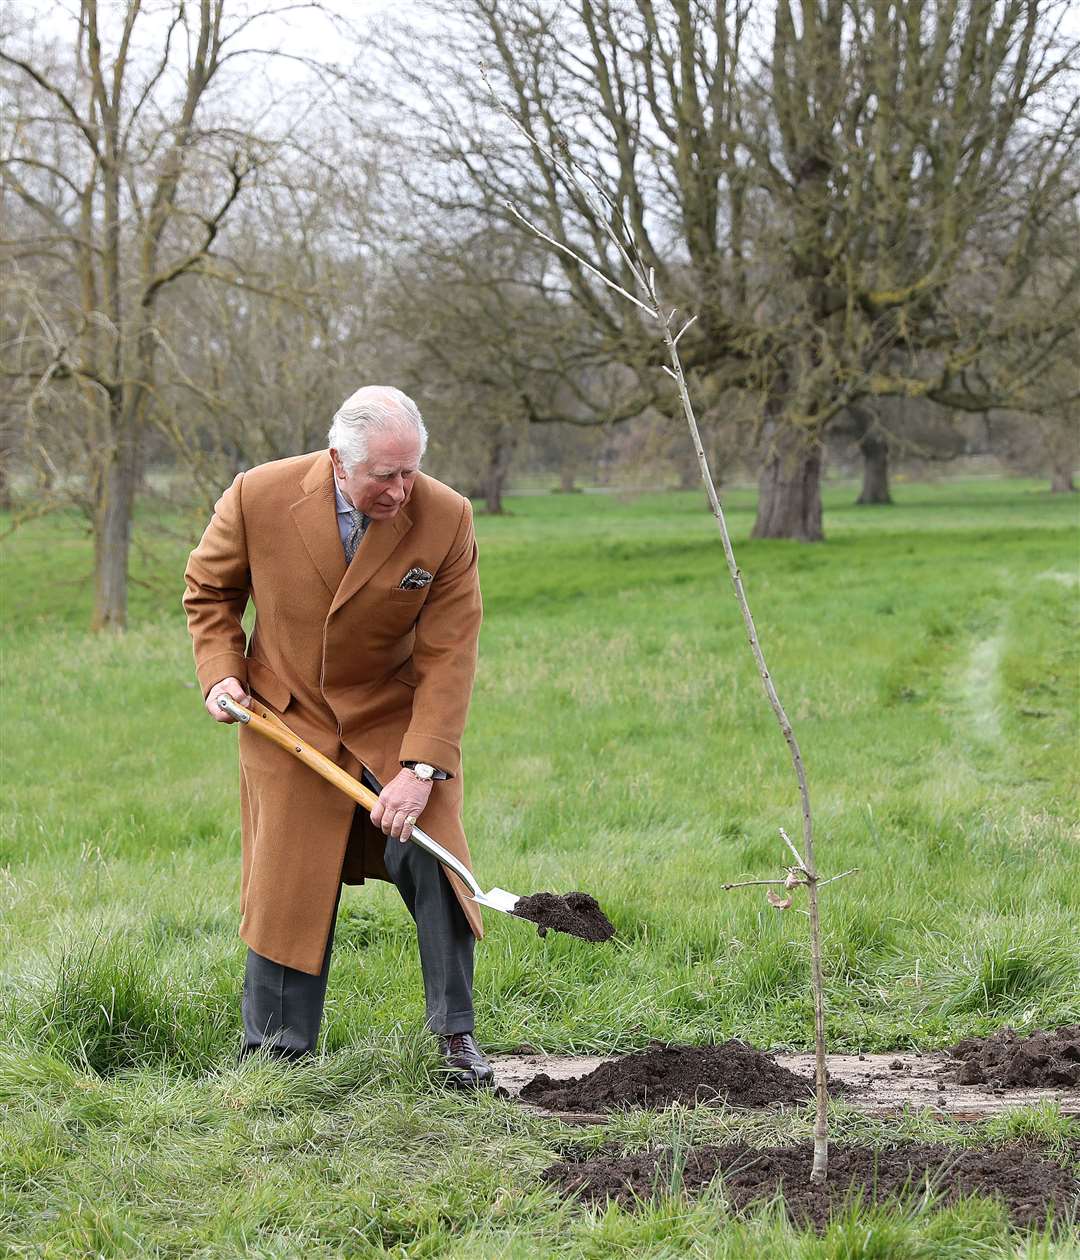 The Prince of Wales planting the first Jubilee tree to mark the Queen’s platinum jubilee in the grounds of Windsor Castle (Chris Jackson/PA)